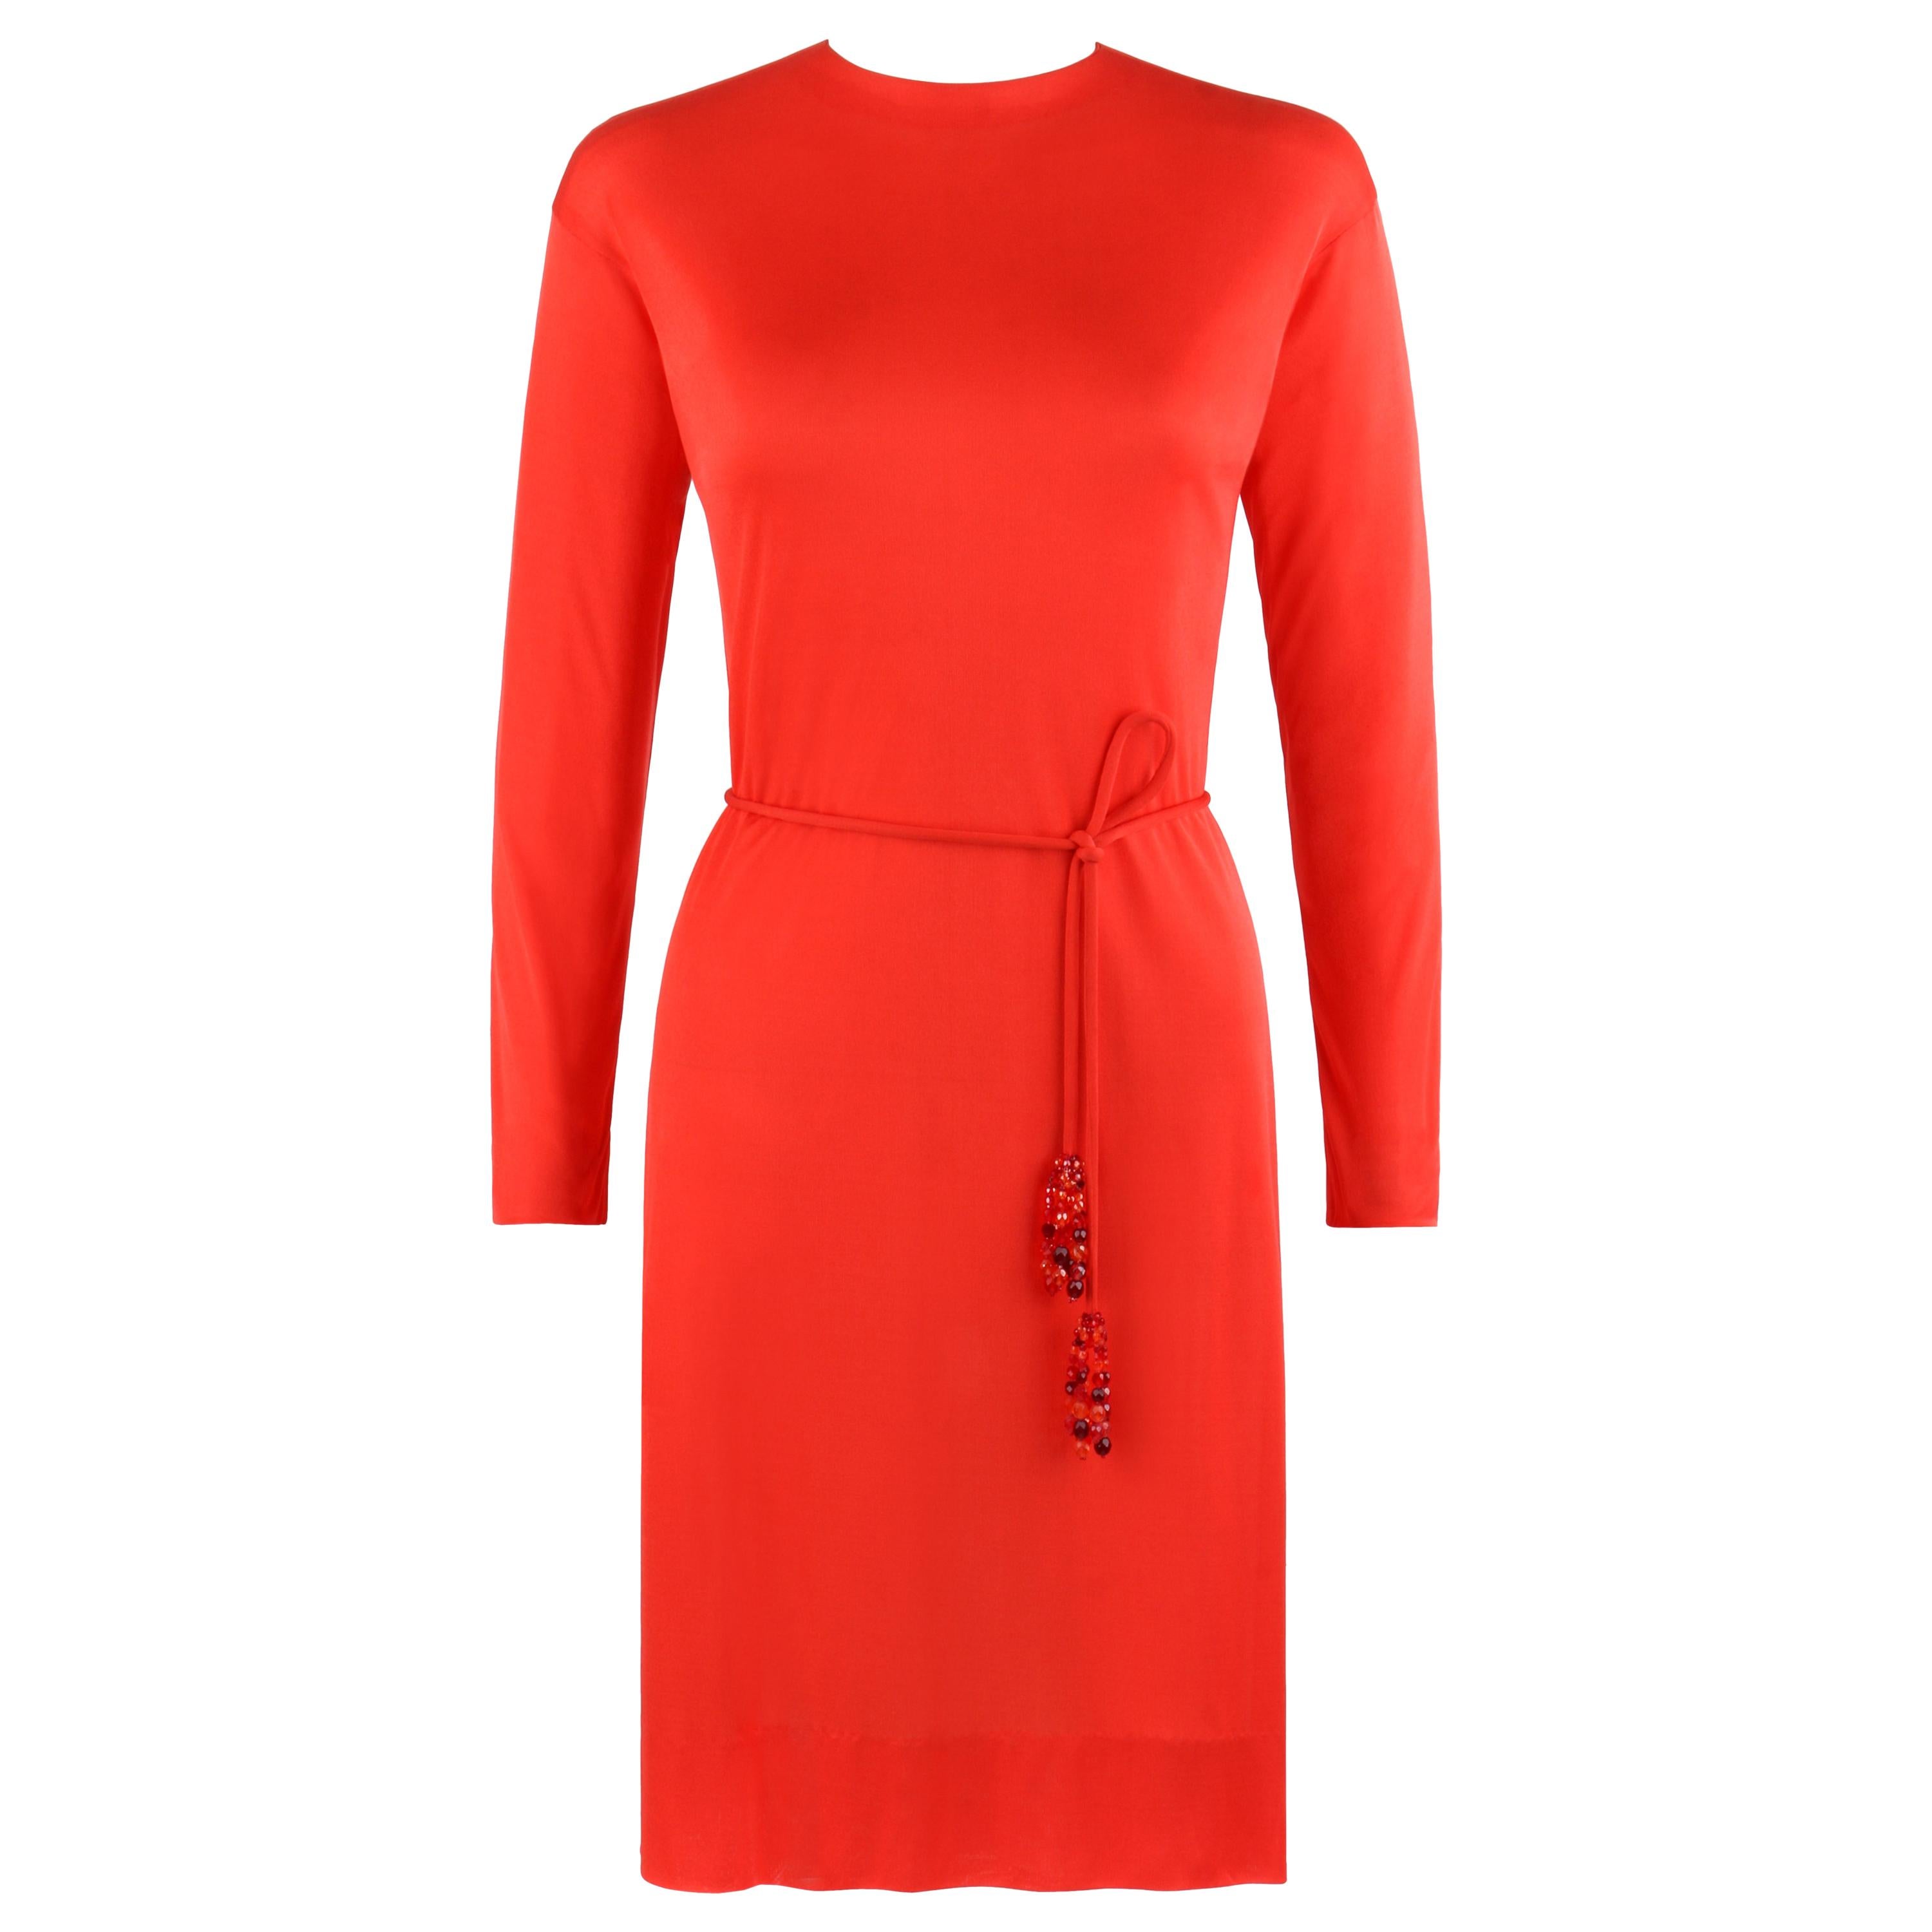 EMILIO PUCCI c.1960’s Coppola E Toppo Belted Scarlet Red Silk Jersey Dress